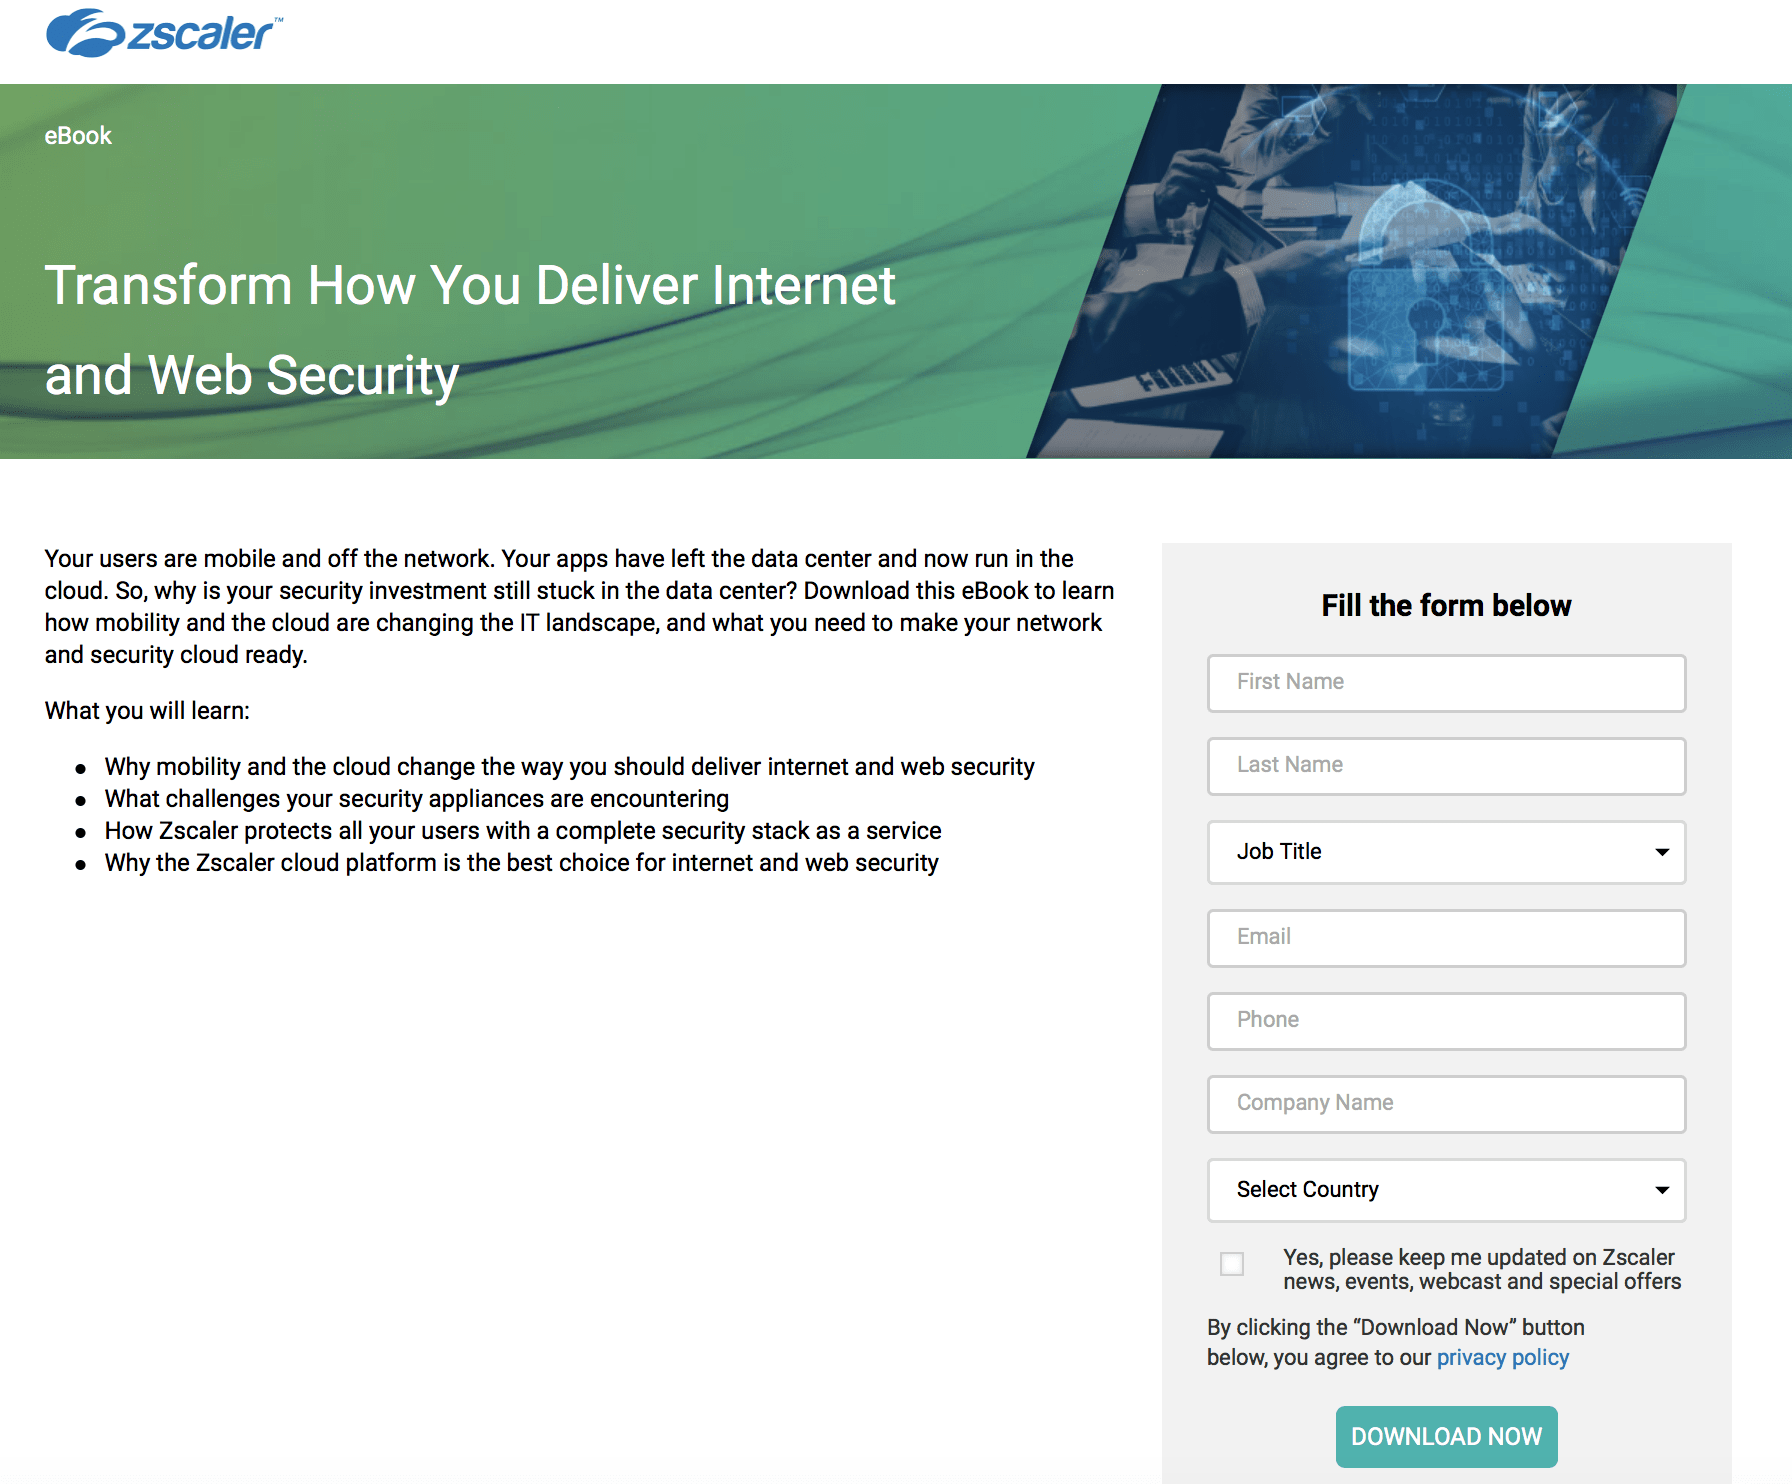 Zscaler PPC landing page